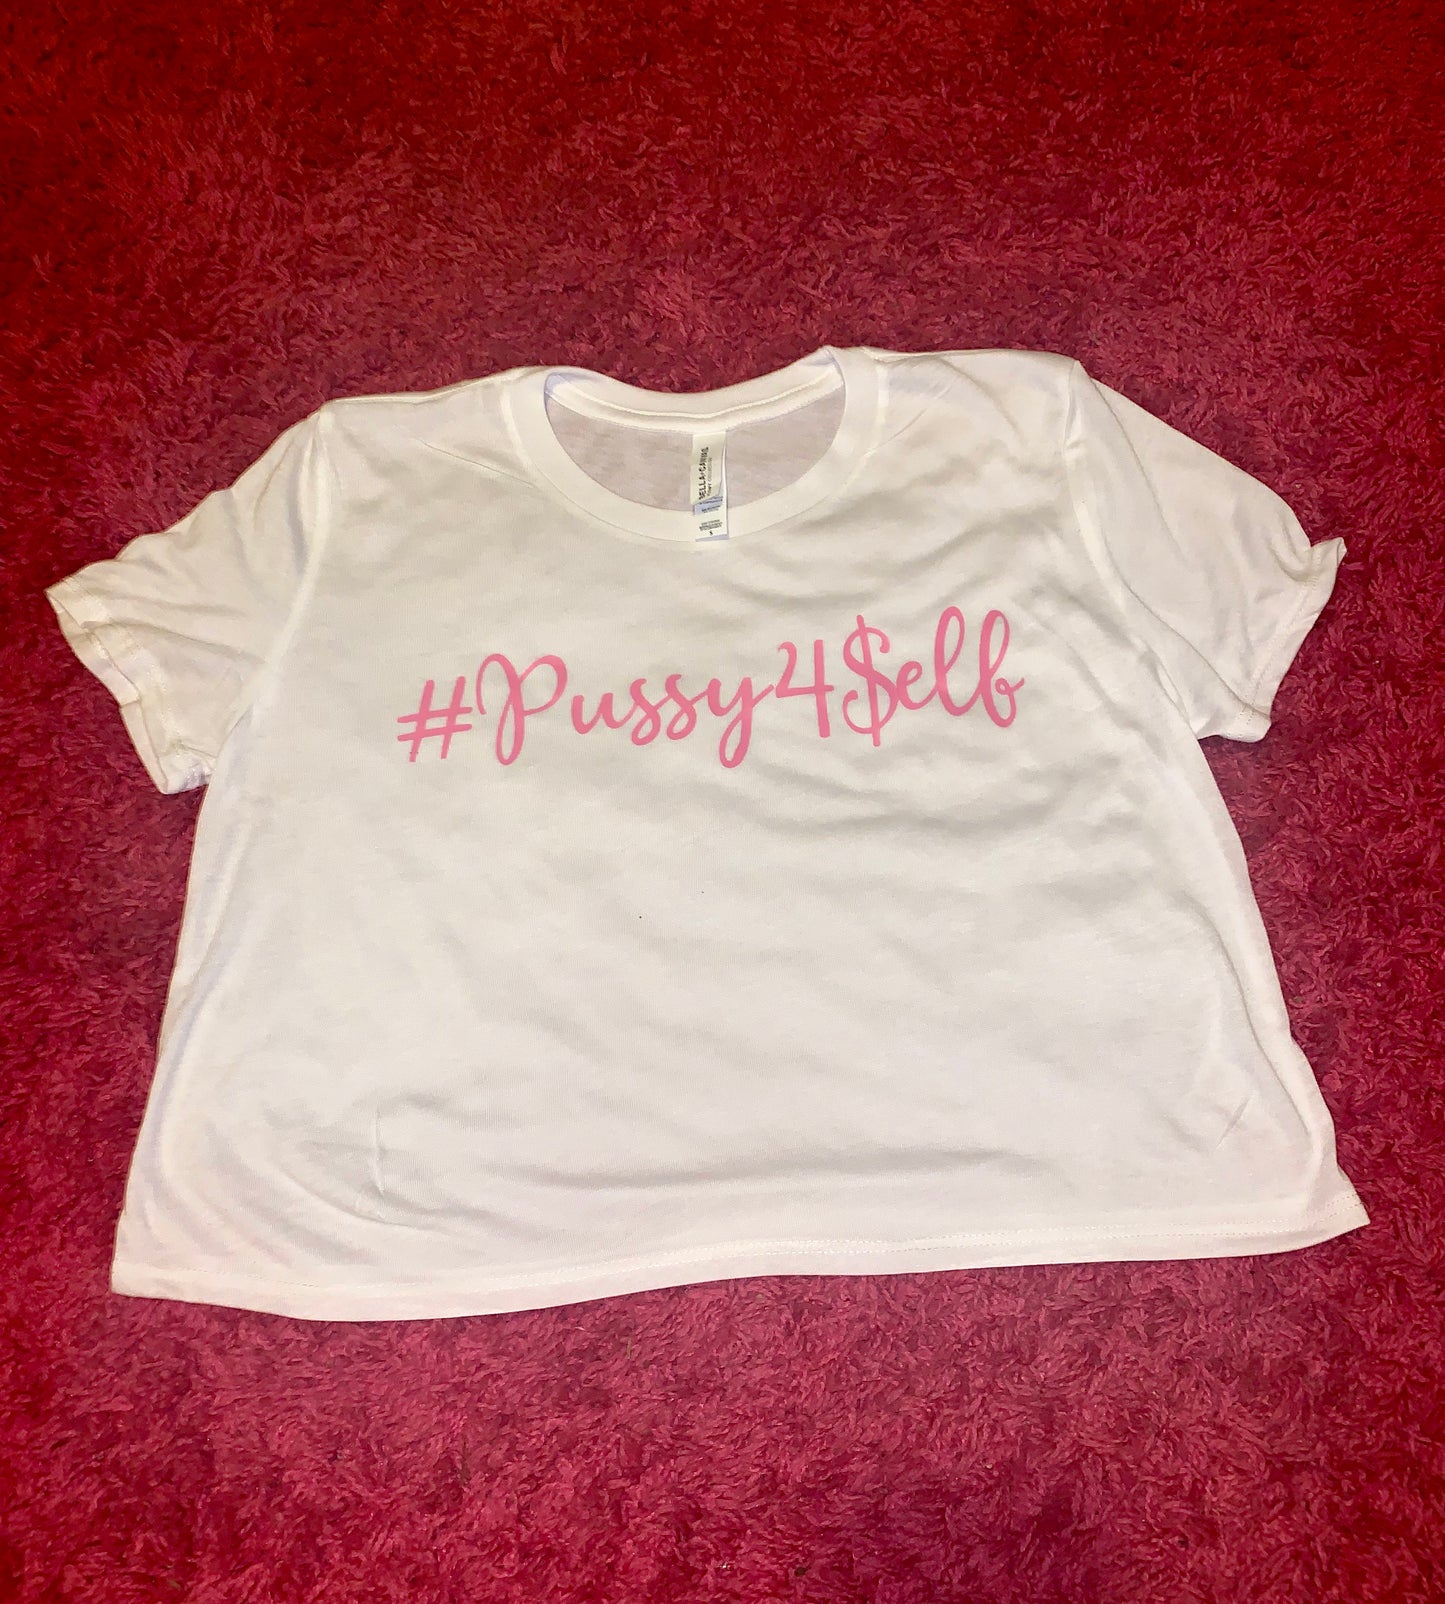 #pussy4self crop top tee white with pink imprint